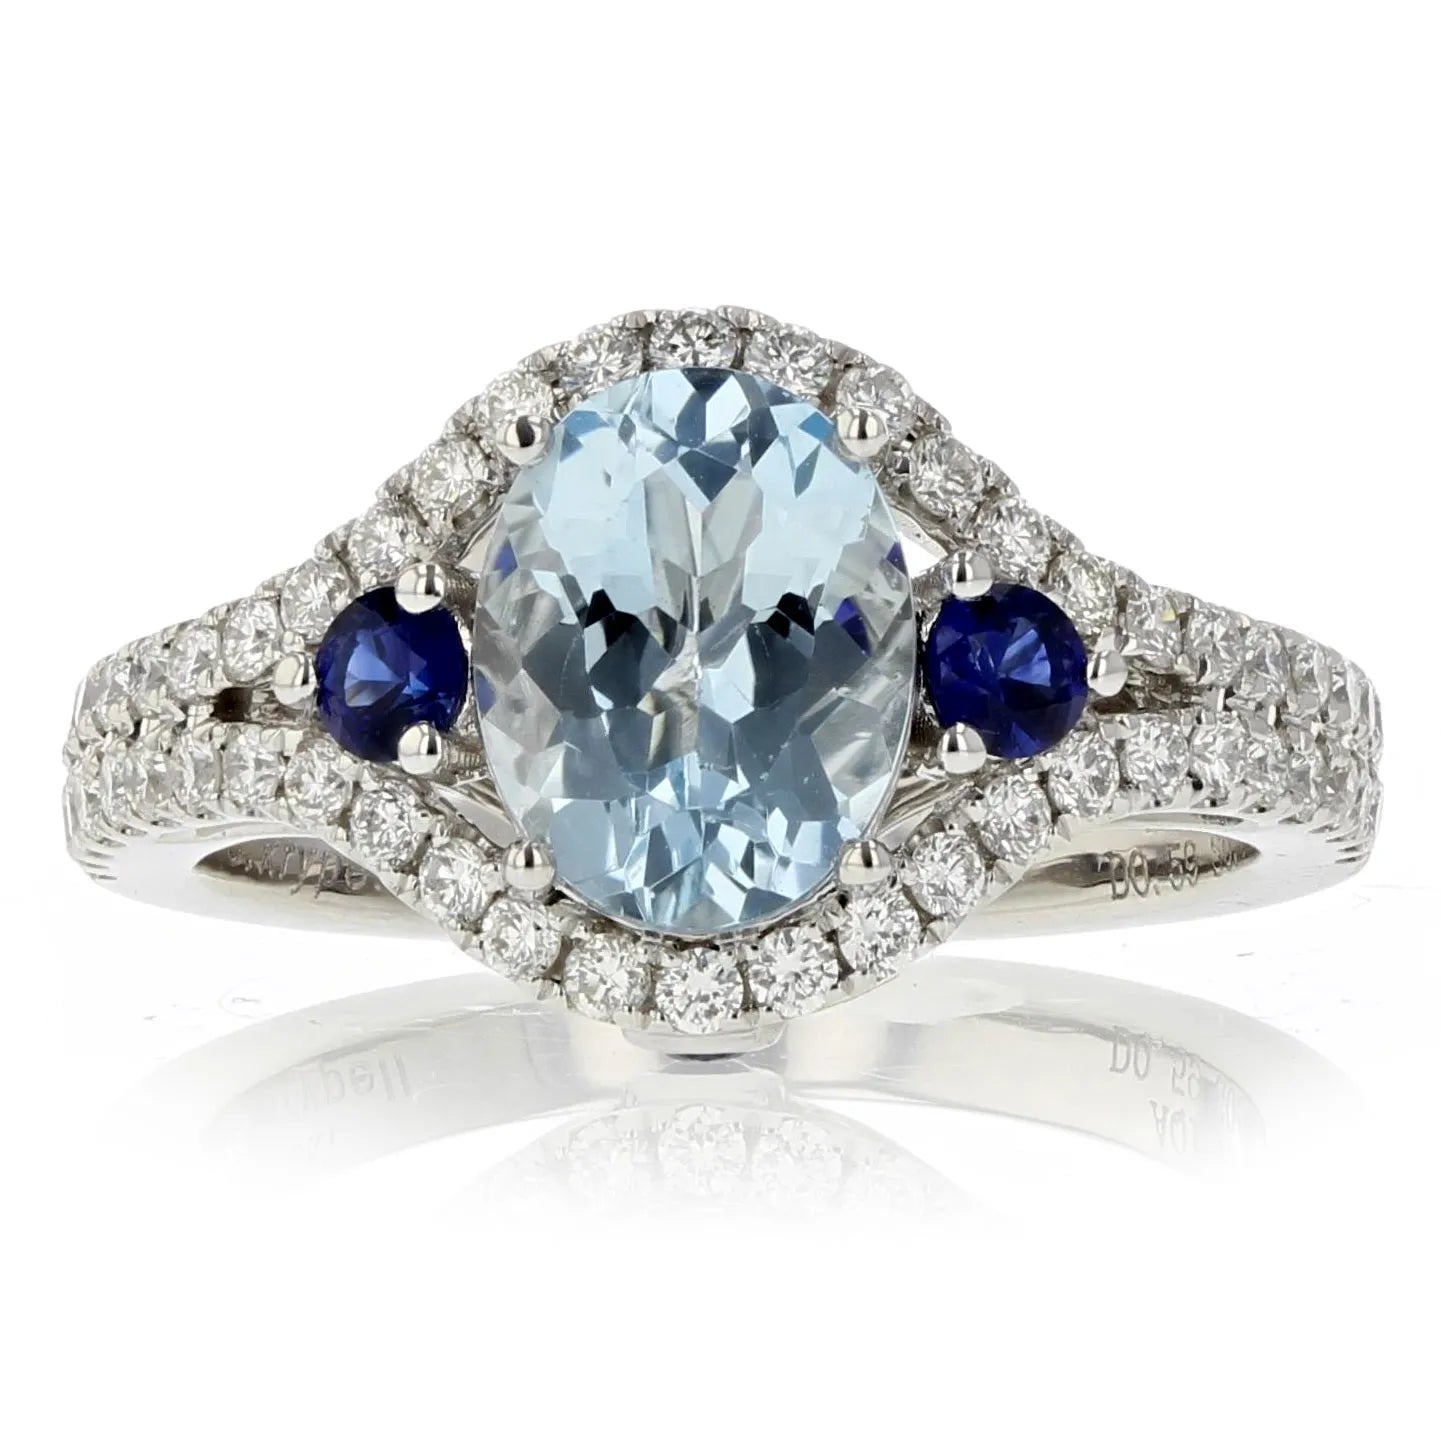 Aquamarines: The Meaning of March's Birthstone